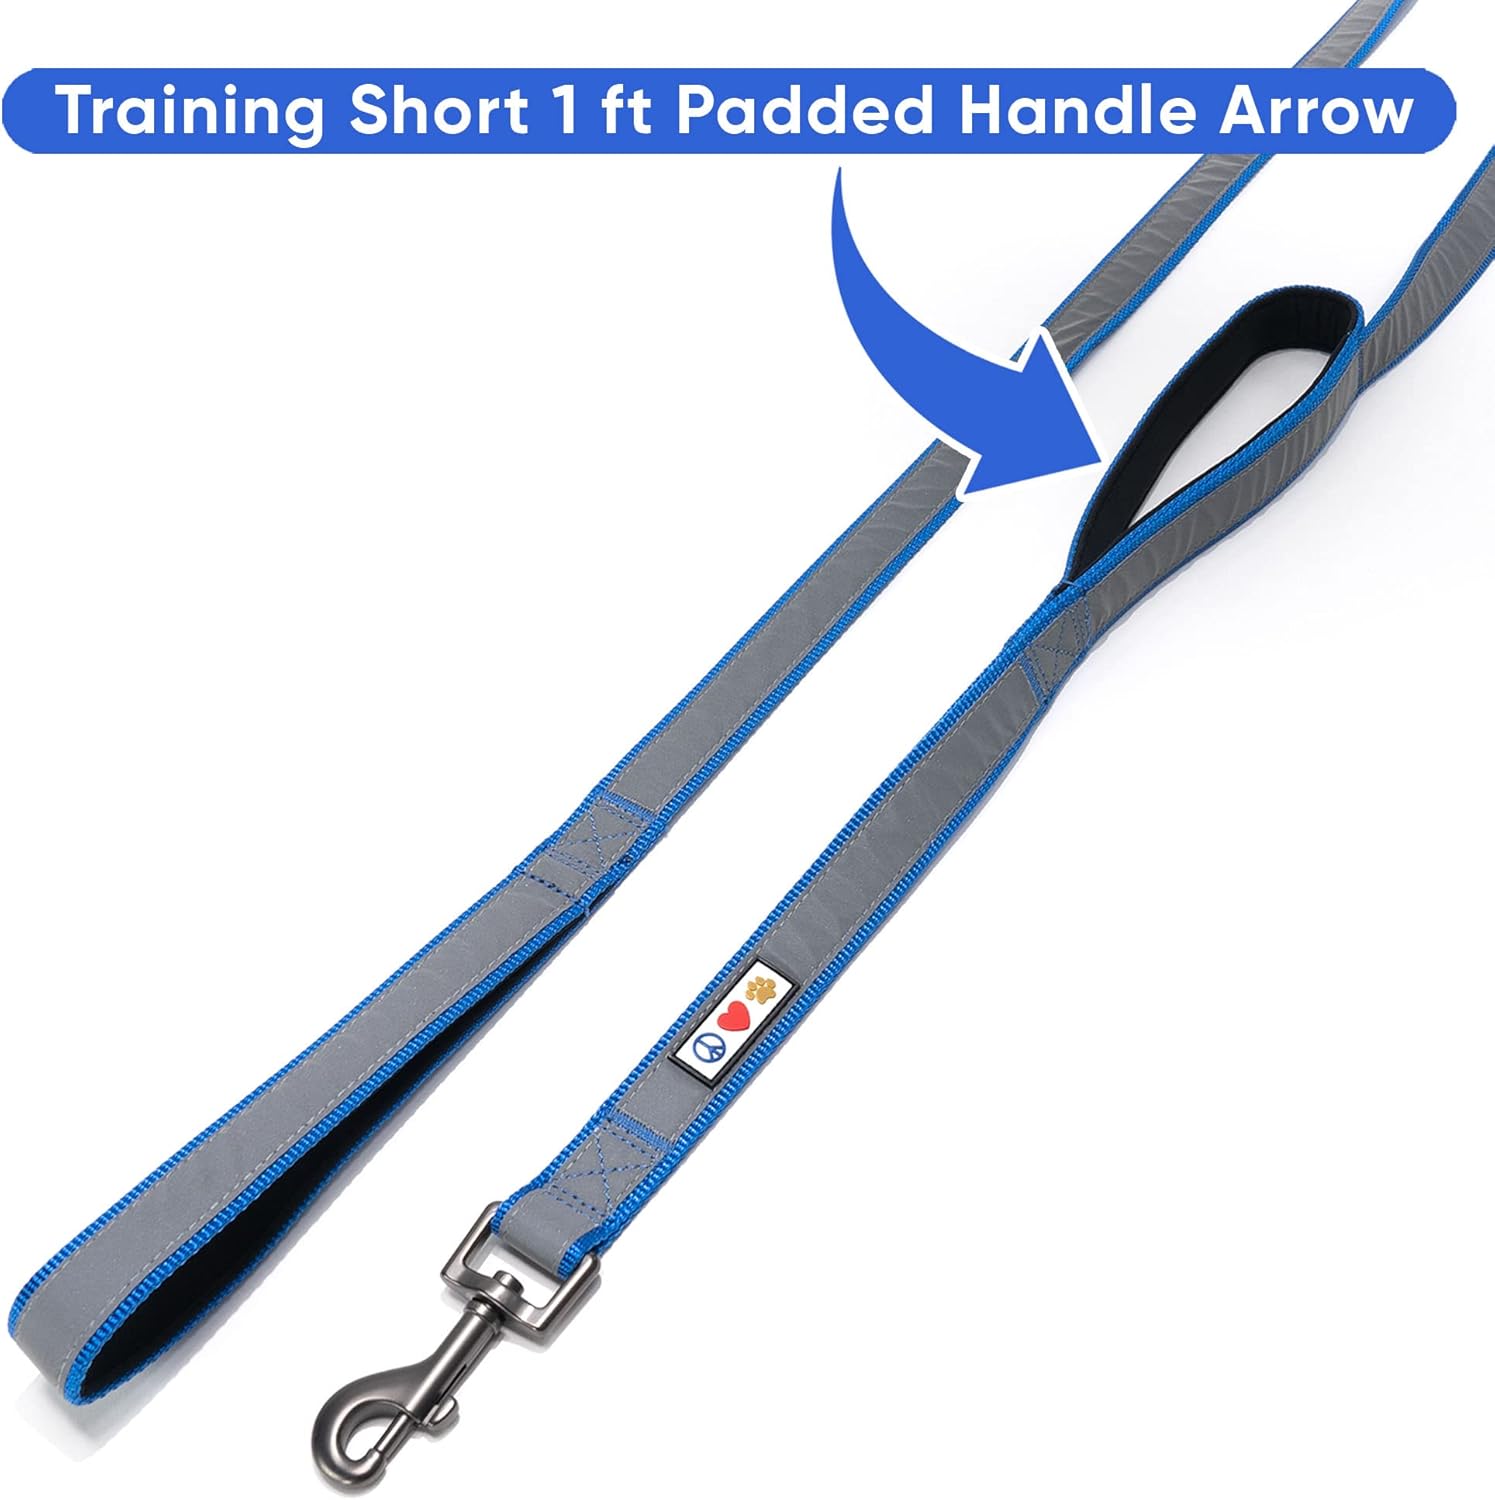 PAWTITAS Puppy Dog Training Double Handle Reflective Lead | Reflective Short Dog Lead for Training | Hands Free Running Dog Lead | 1.8 M Reflective Dog Lead Comfortable Padded Handle - Blue Lead :Pet Supplies